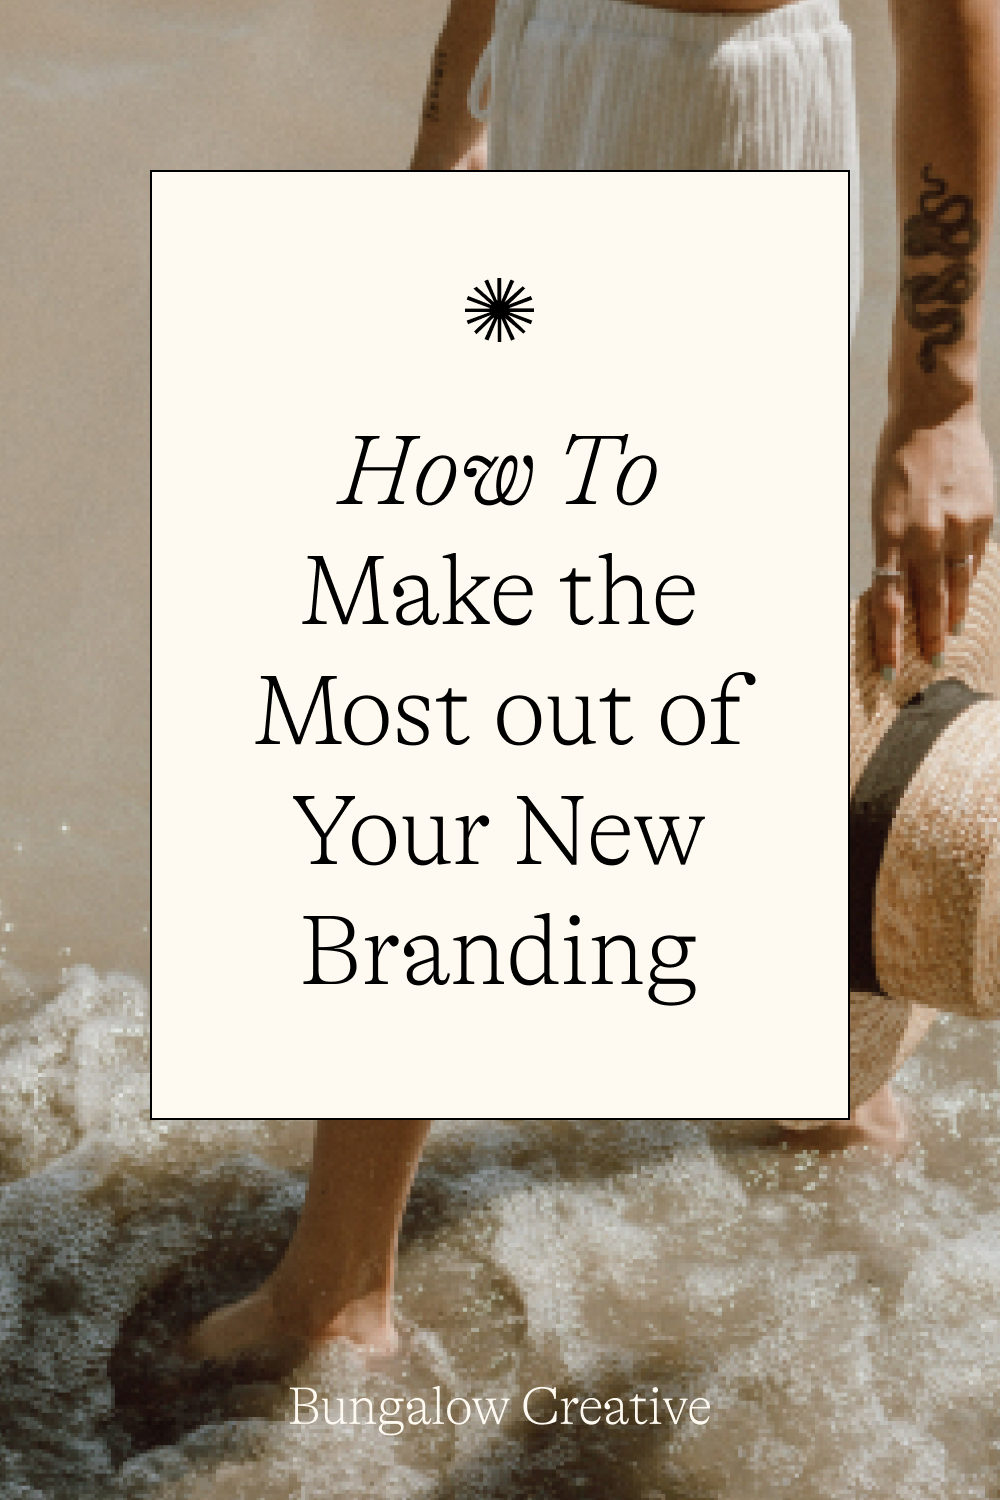 How to Make the Most Out of Your New Branding